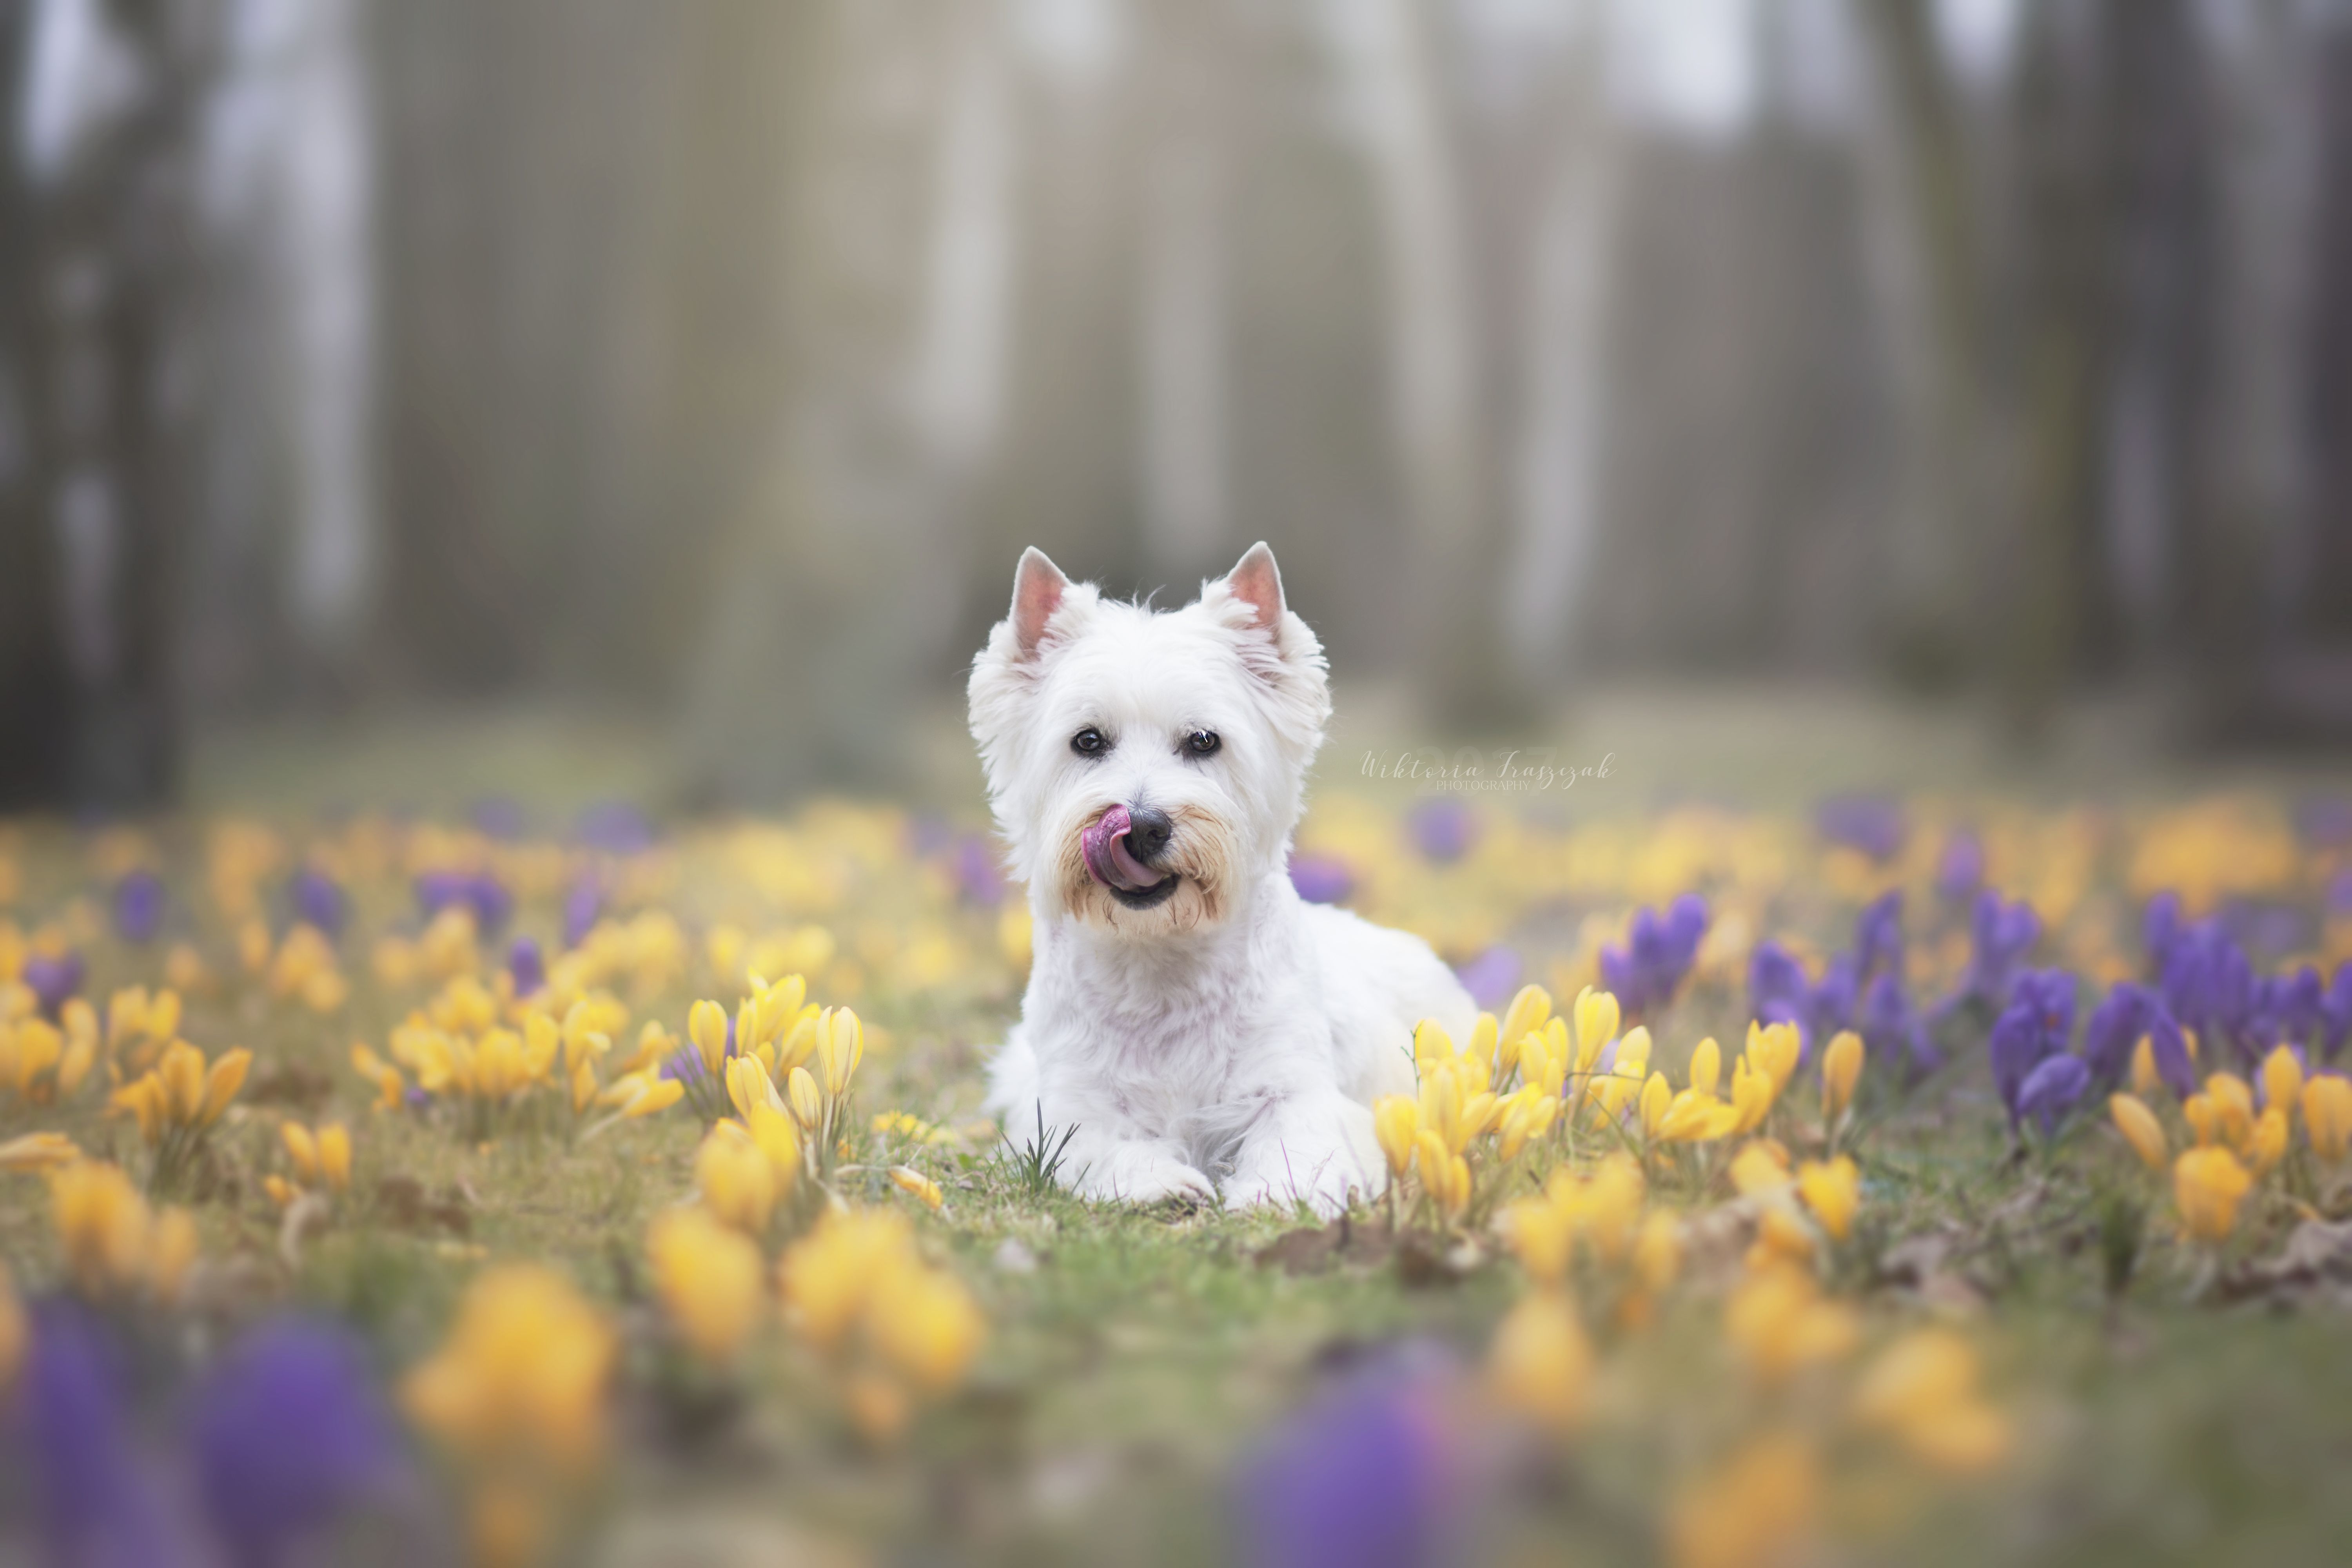 Wallpaper, pet, dog, dogphotography, outdoor, spring, flower, flowers, color, colorfull, westhighlandwhiteterrier, white 6000x4000